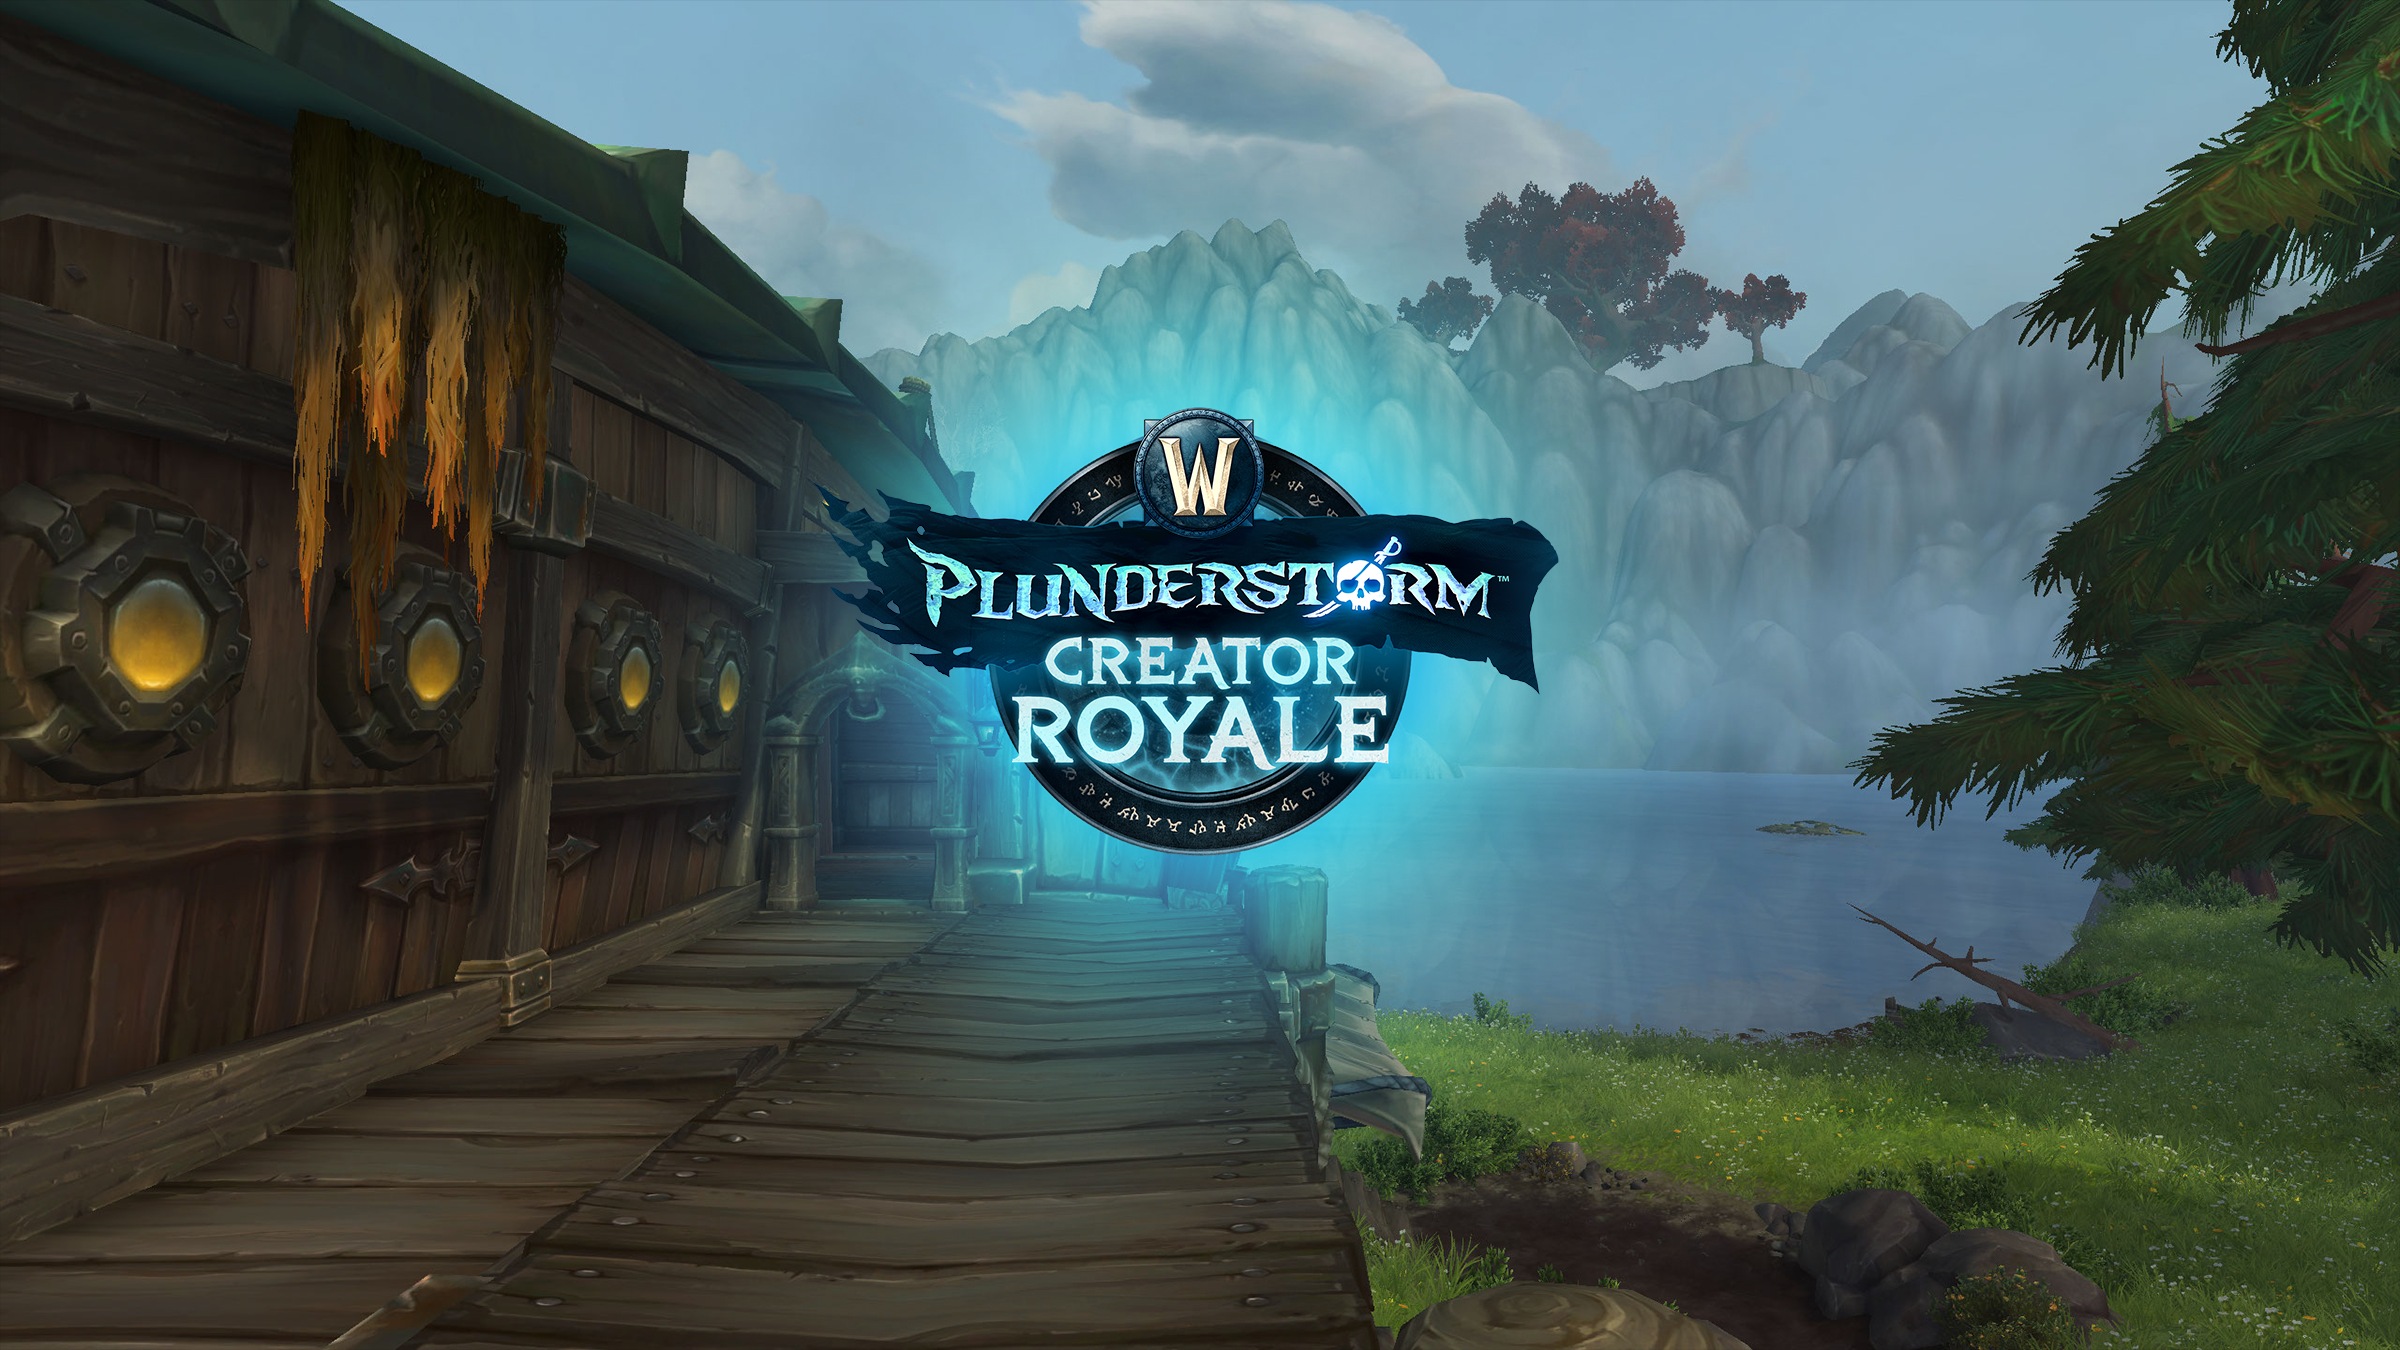 Presenting the Plunderstorm® Creator Royale coming March 30!